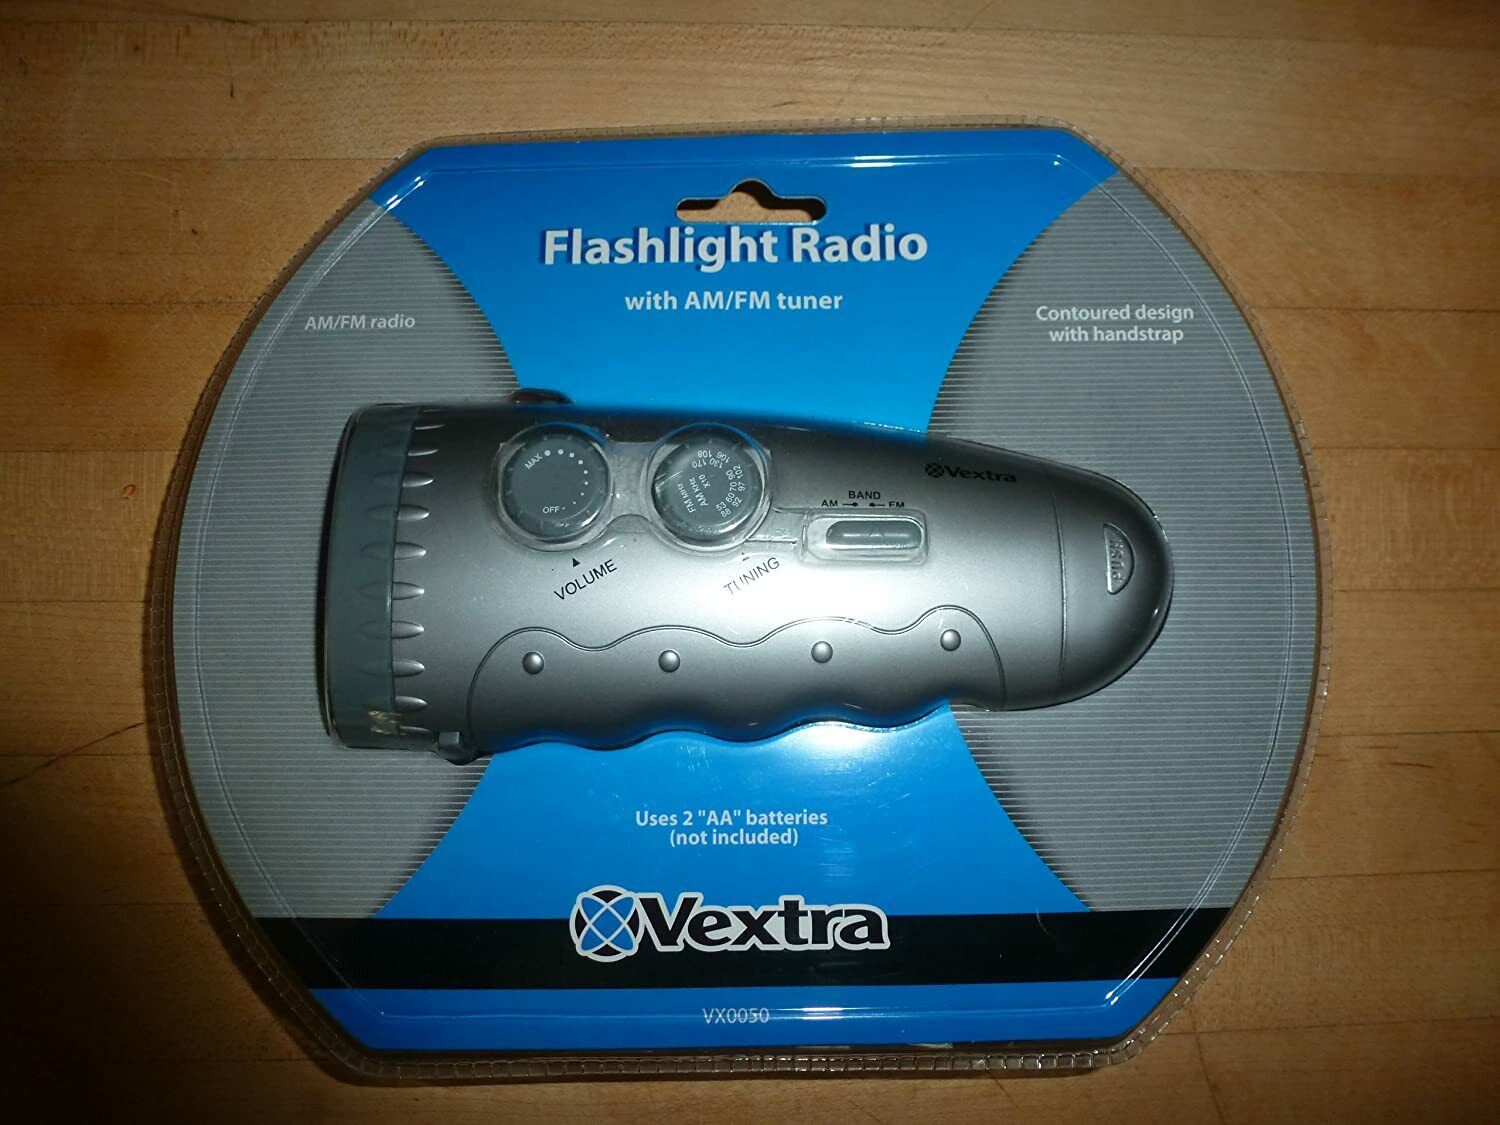 Vextra VX0050 Hand Held Portable Flashlight with Built-in AM/FM Radio Tuner